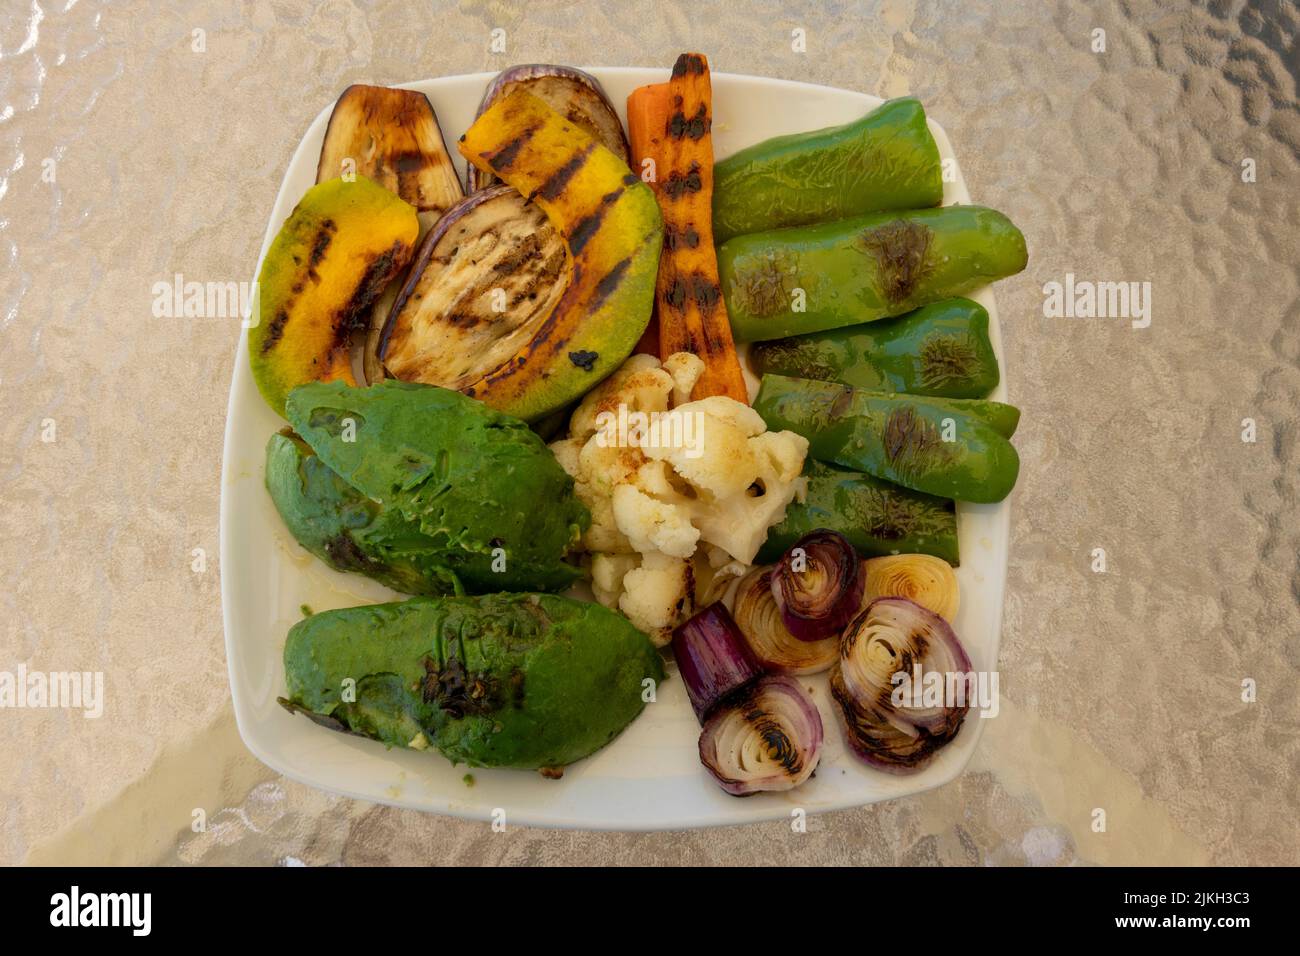 Grilled organic vegetable dish, with pepper, onion, carrot, cauliflower, pumpkin, eggplant and avocado. Healthy and tasty food. Vegetarian food Stock Photo